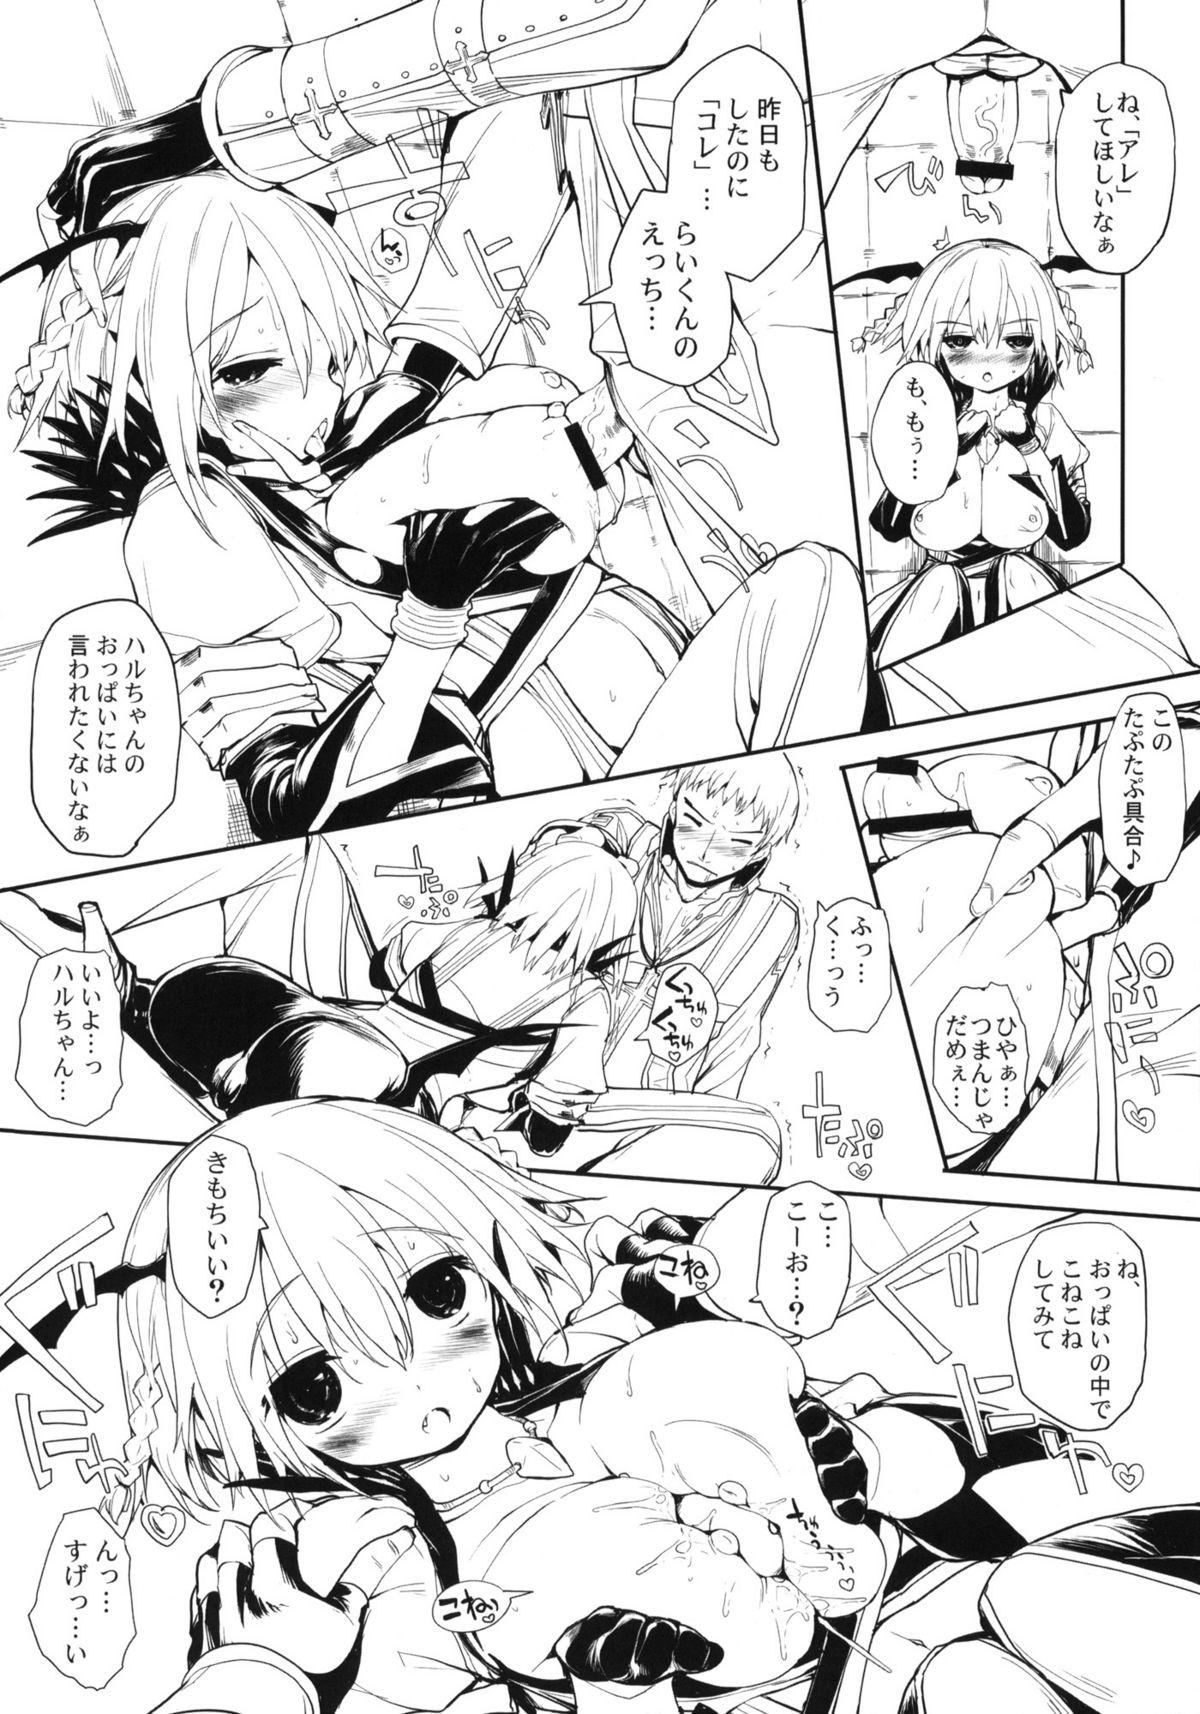 Amature Sex COMIC RO PREVIEW - Ragnarok online Eating - Page 5